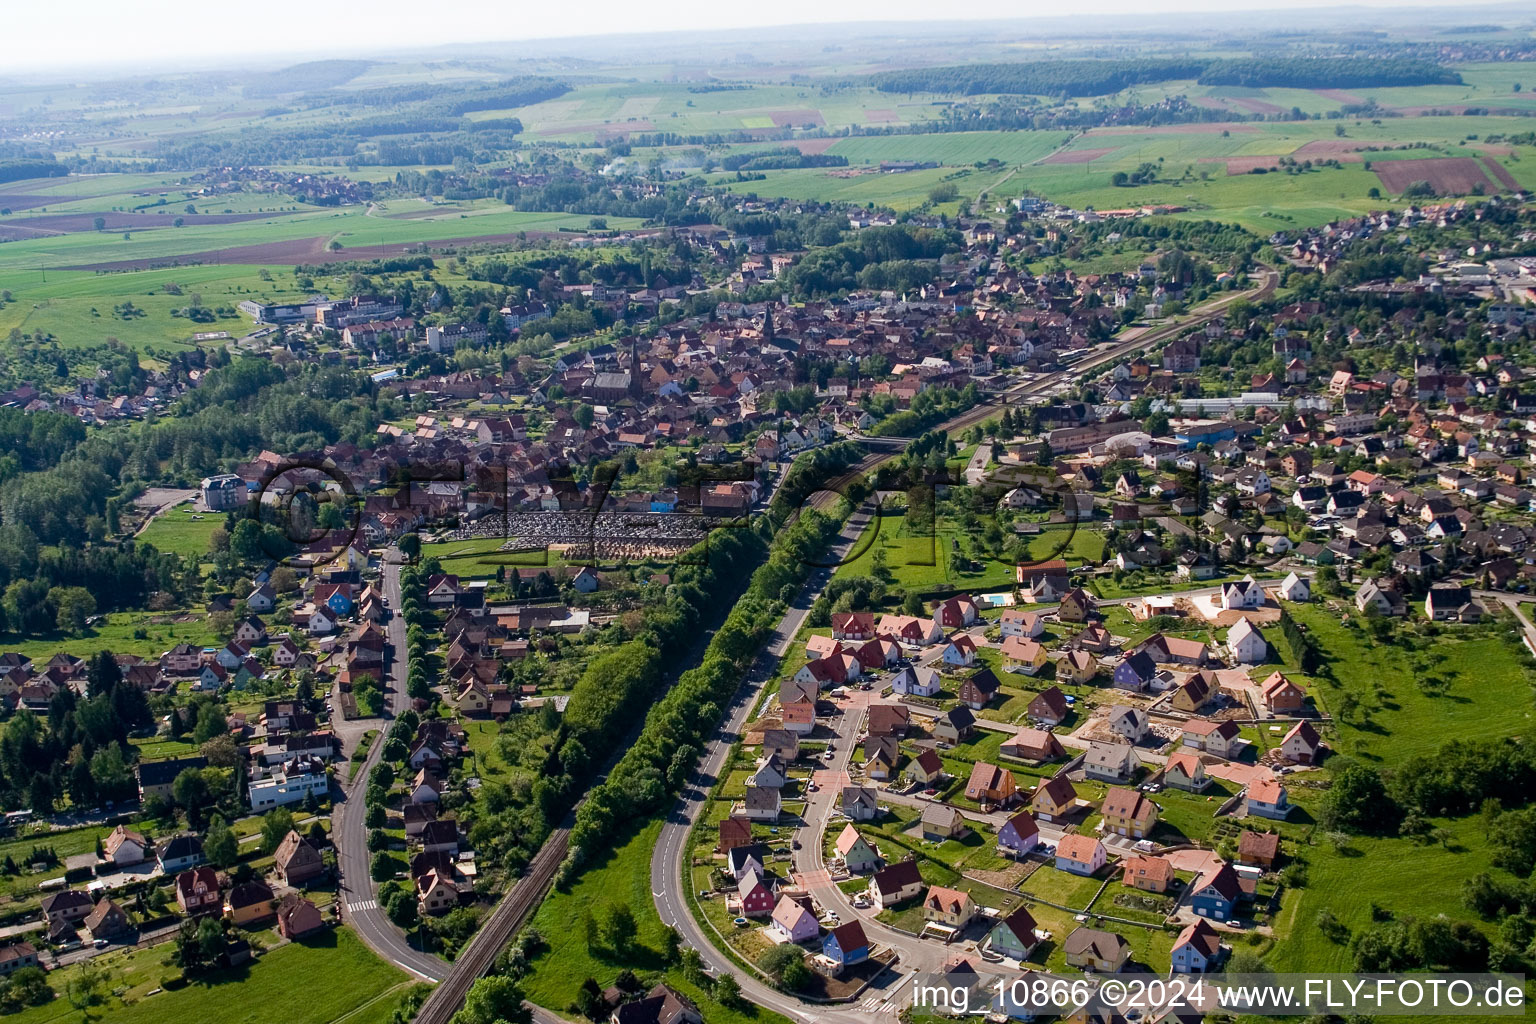 Town View of the streets and houses of the residential areas in Ingwiller in Grand Est, France